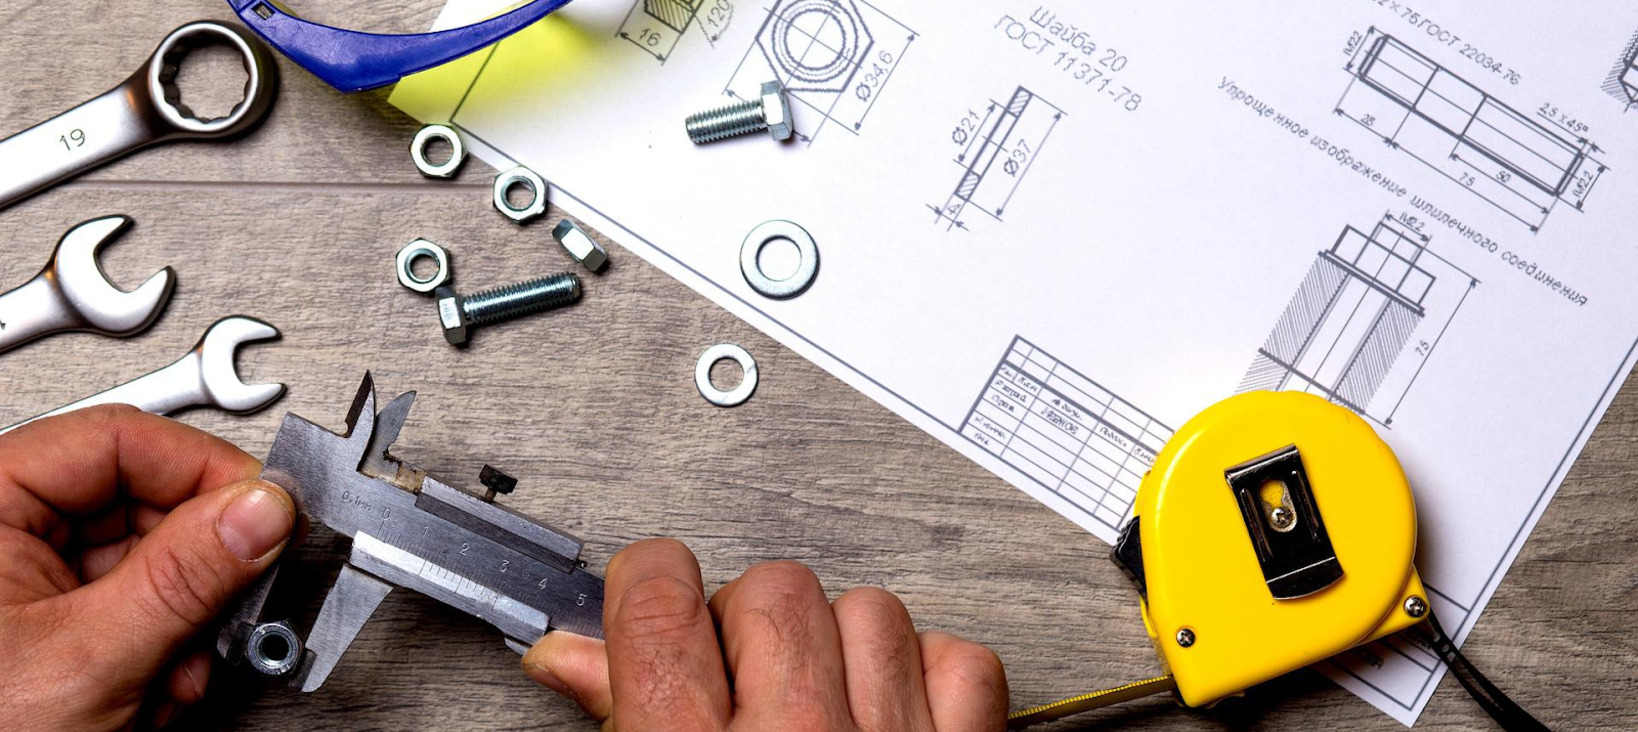 A photo of somebody measuring the size of a bolt, with several screws, spanners, and a schematic drawing of bolts in the background.